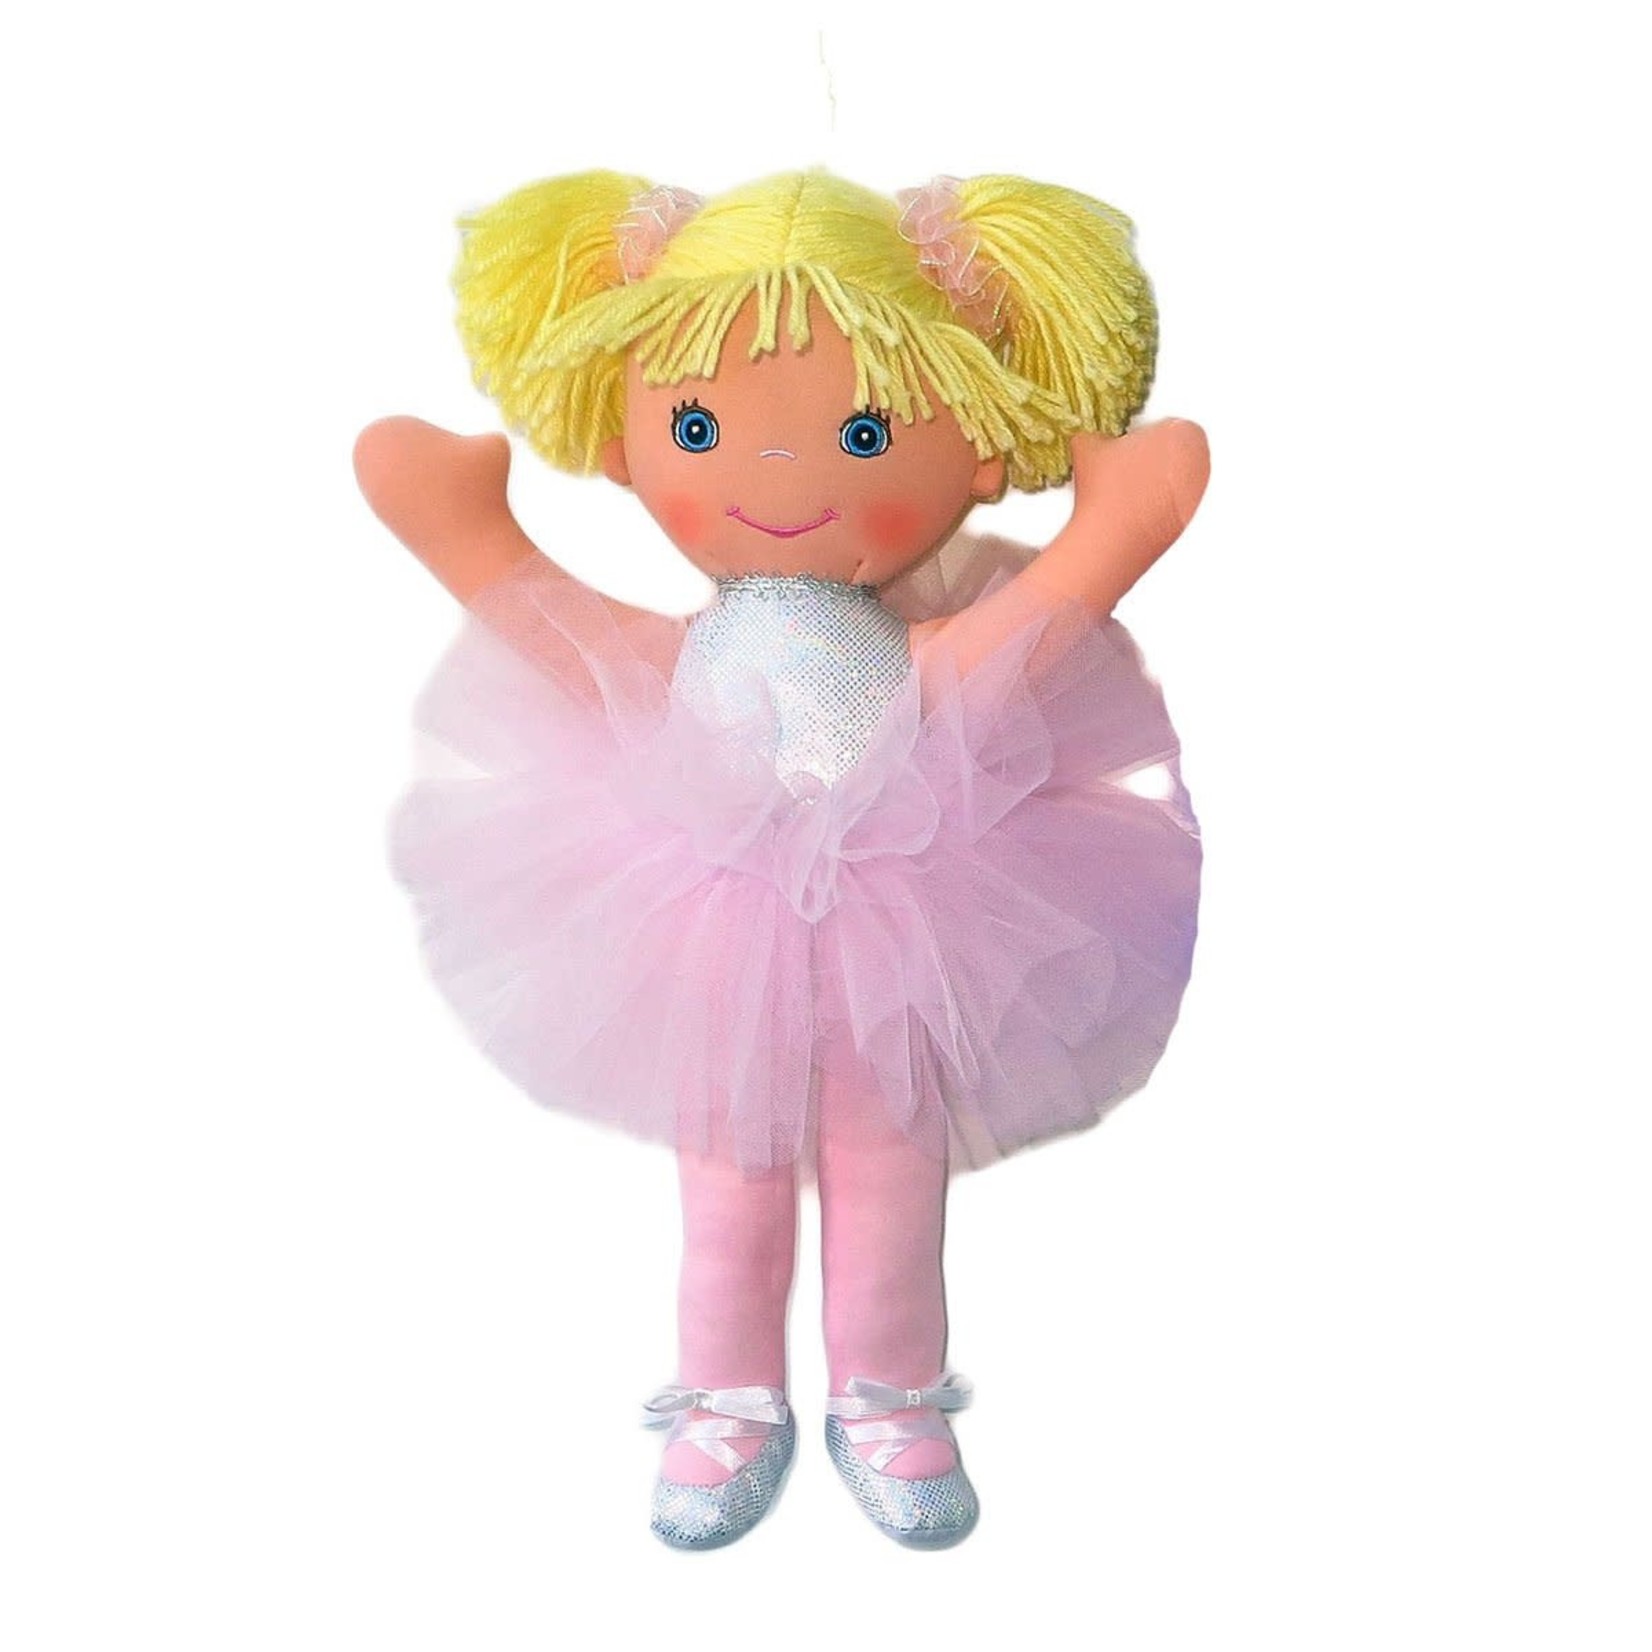 Well Made Toys Well Made Toy 18" Ballerina With Pigtails